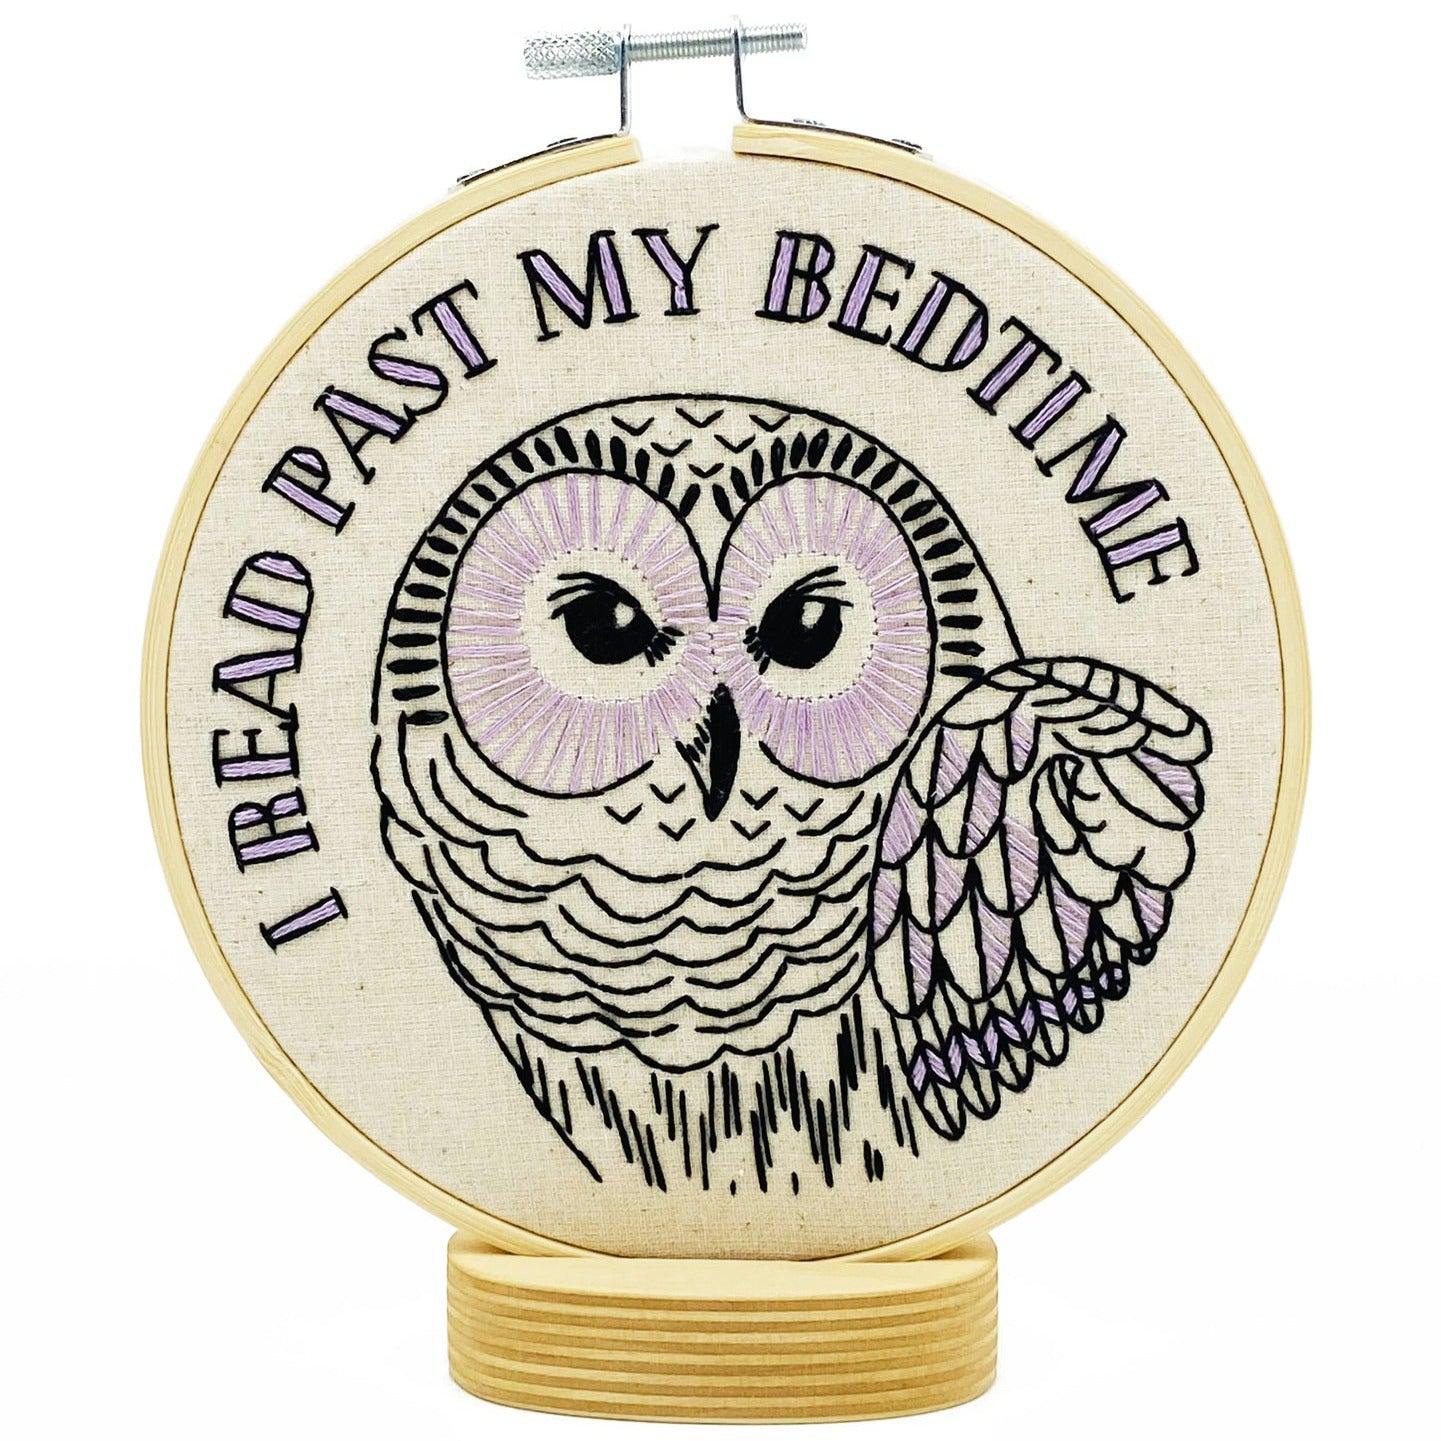 Hook, Line & Tinker-I Read Past My Bedtime Embroidery Kit-embroidery kit-gather here online